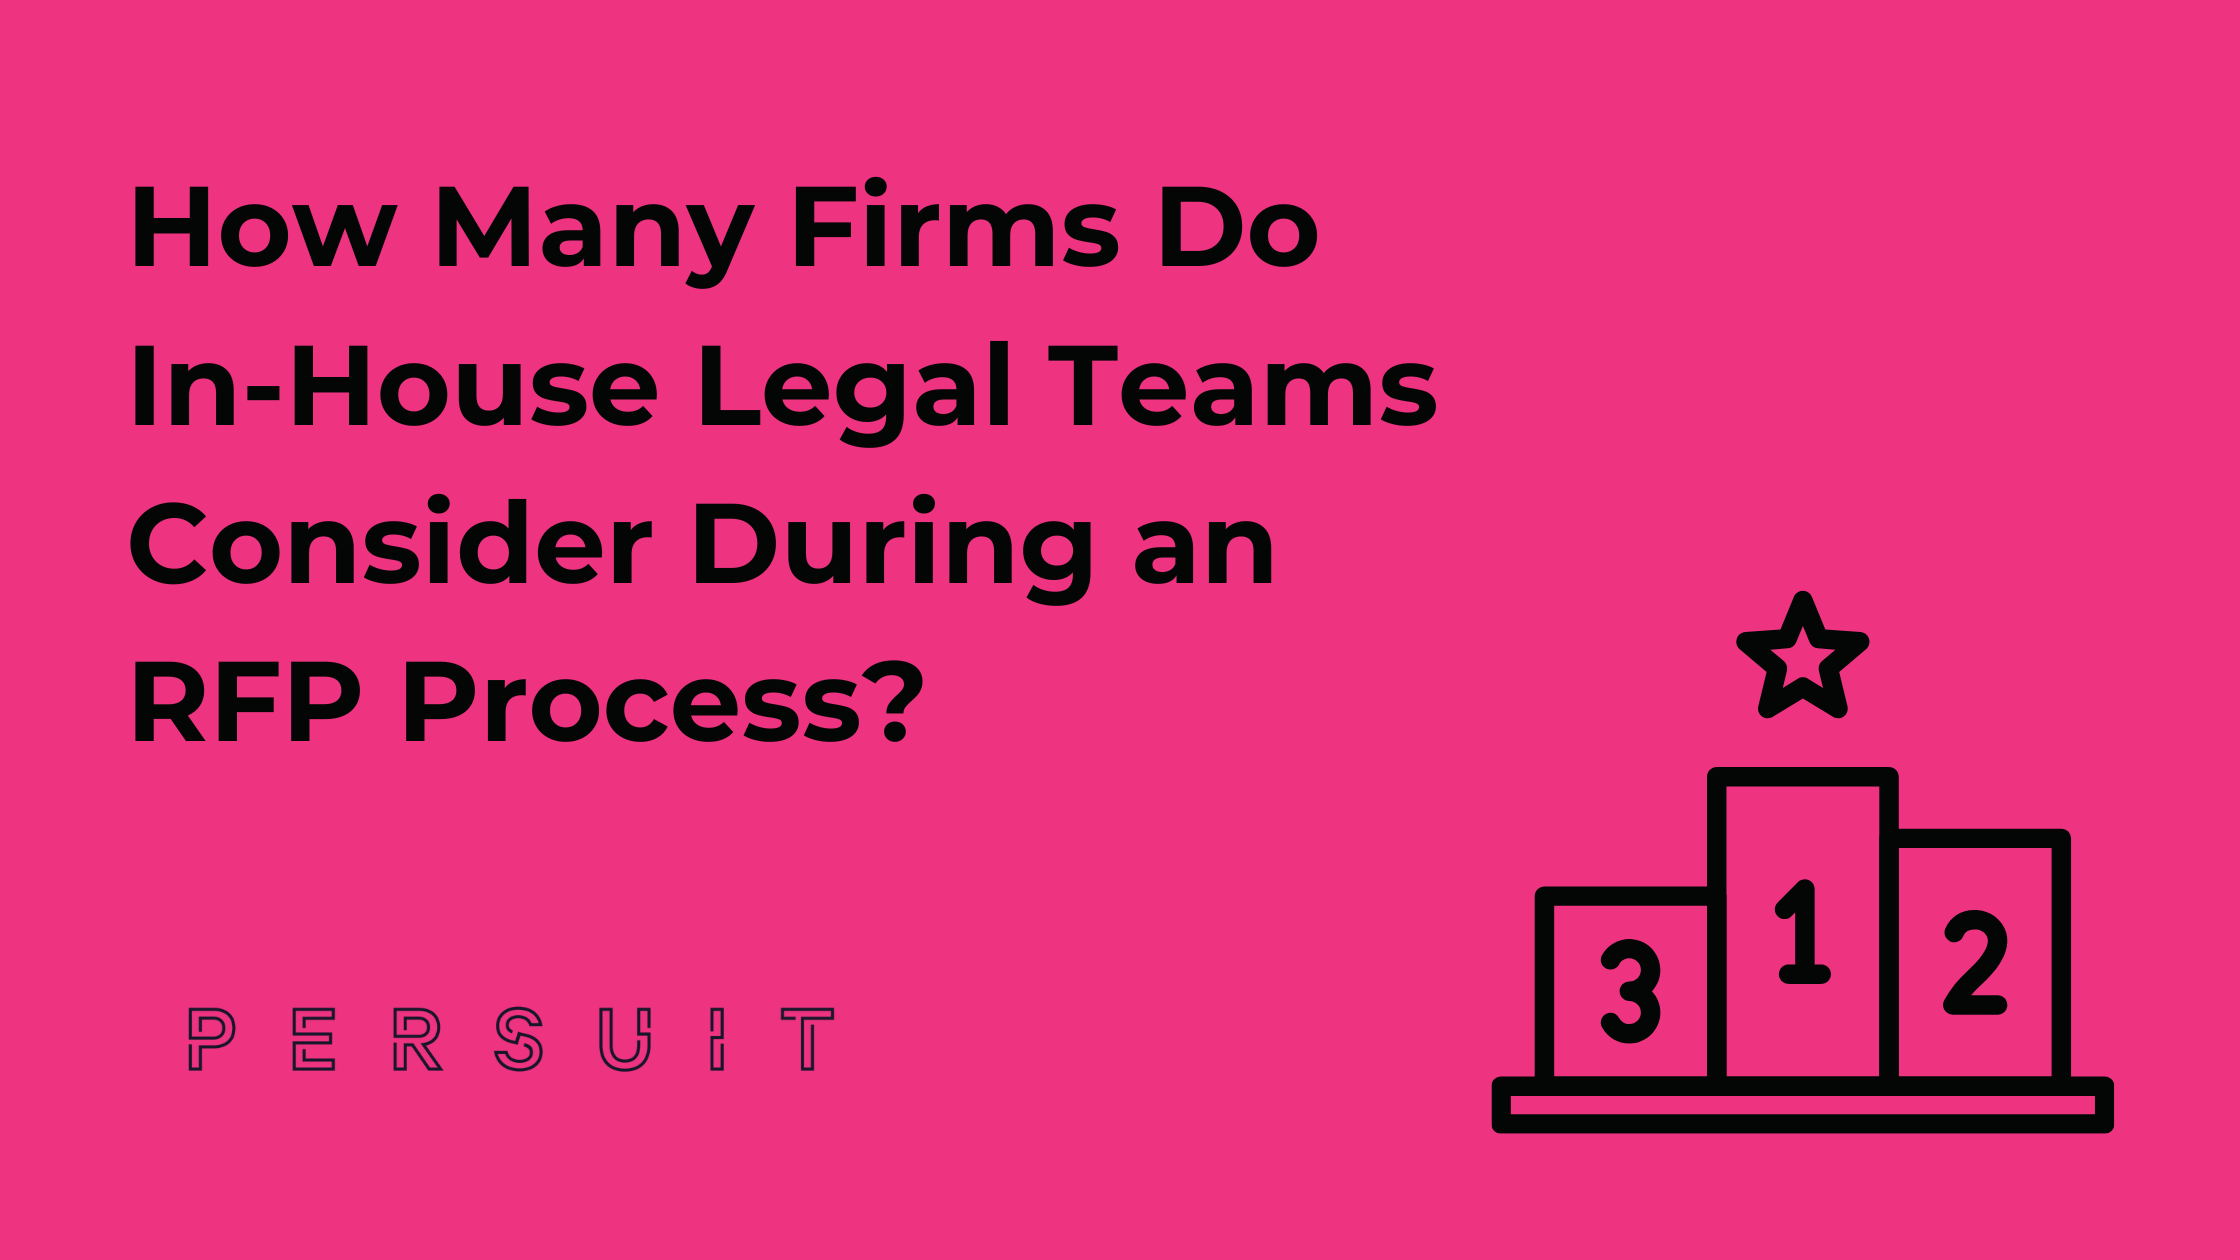 How Many Firms Do In-House Legal Teams Consider During an RFP Process?